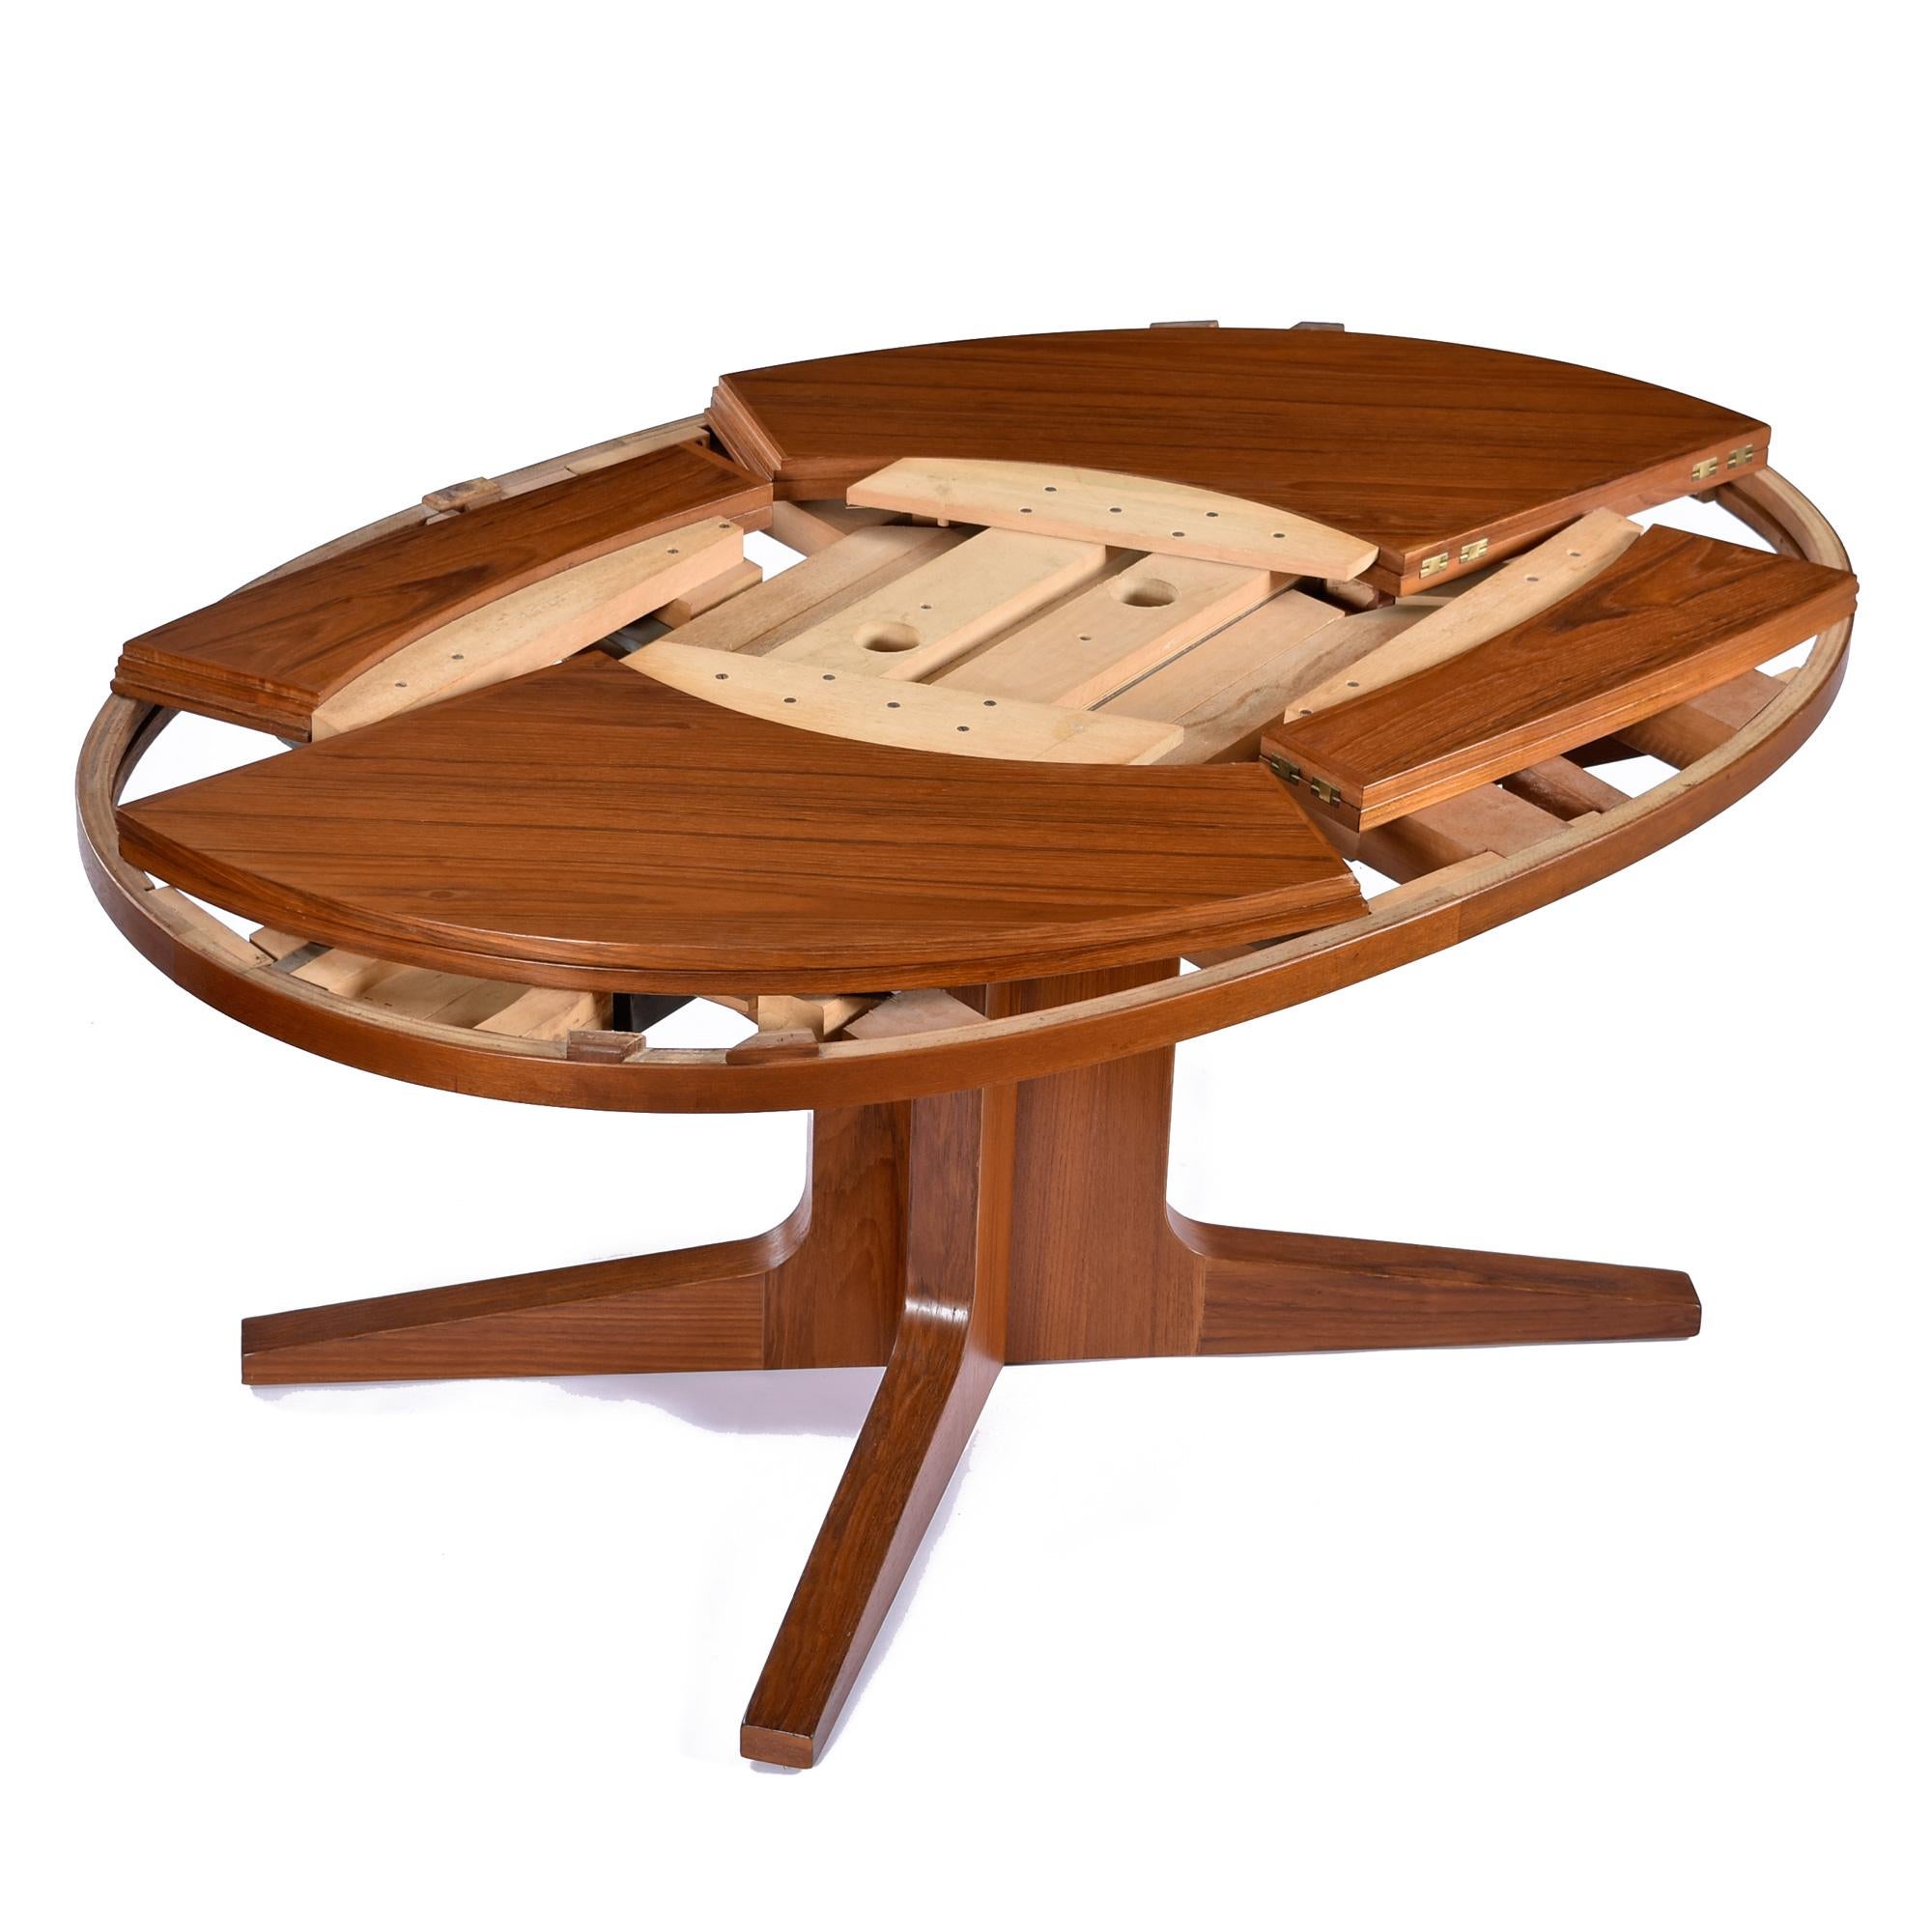 Danish Teak Flip-Flap Oval Lotus Expanding Dining Table by Dyrlund In Good Condition For Sale In Chattanooga, TN